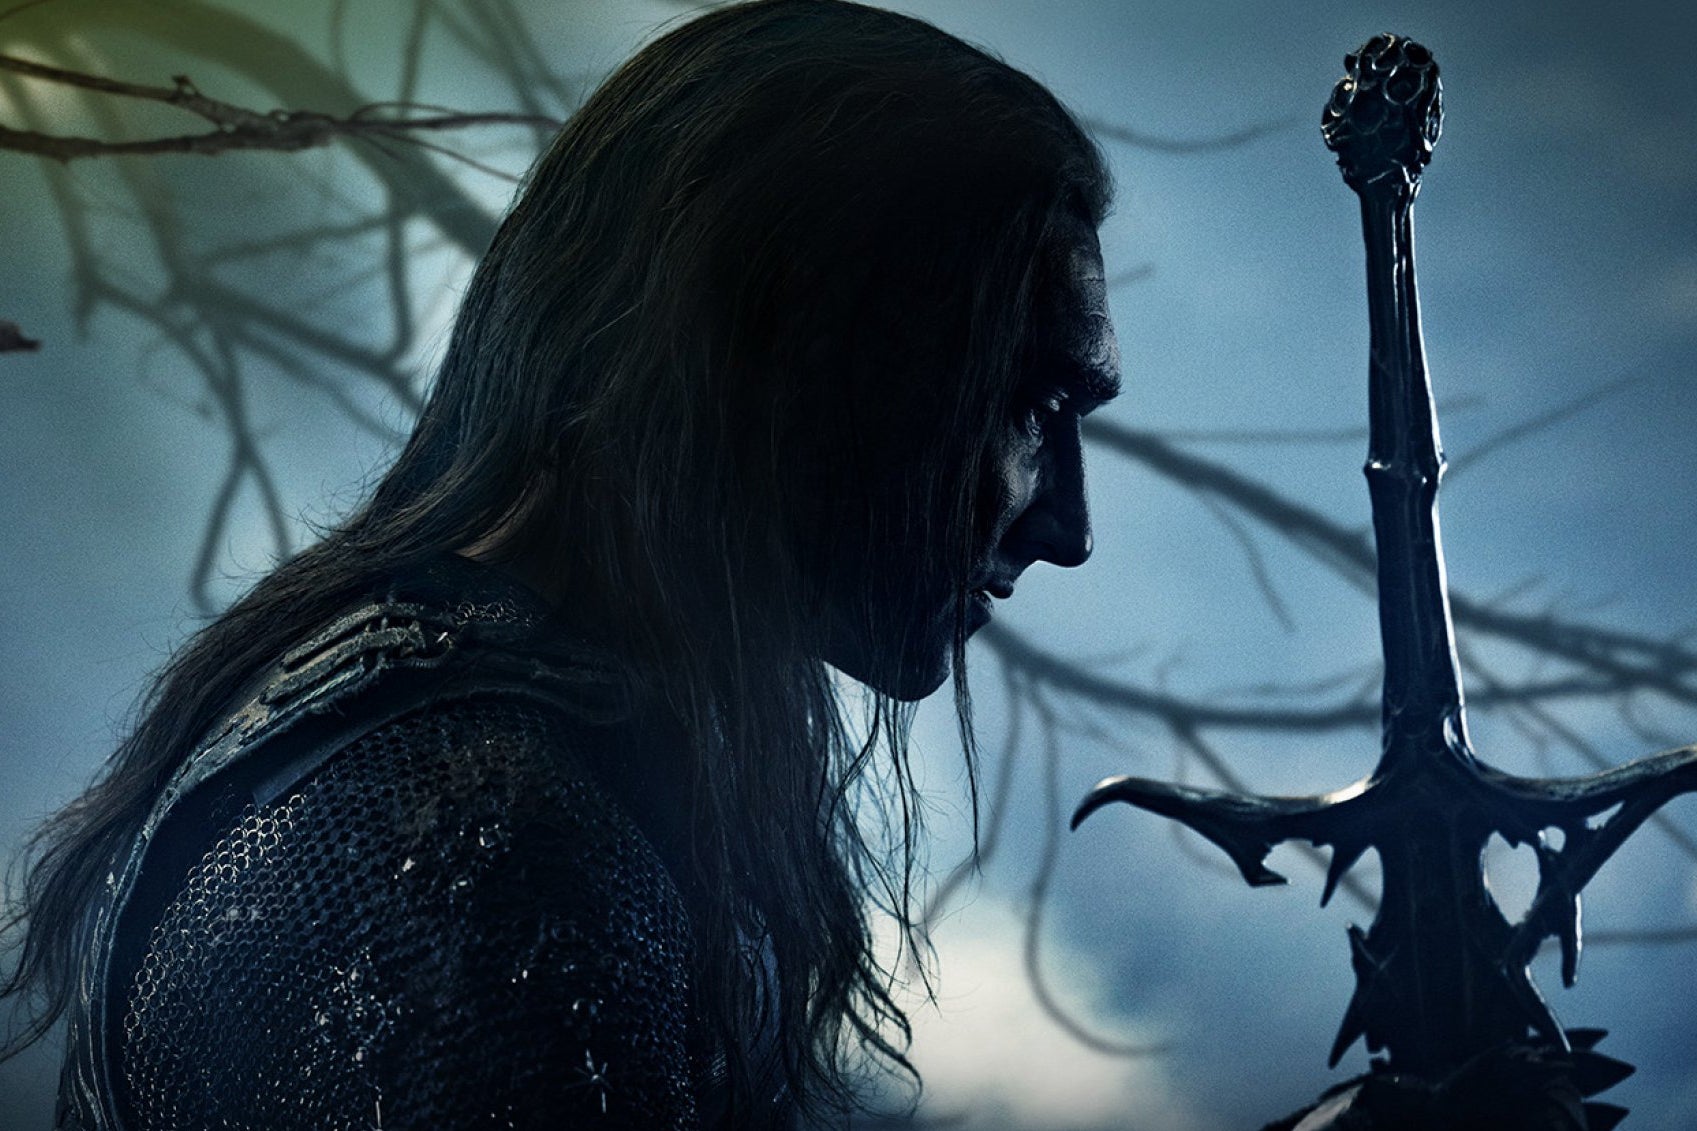 A man with long black hair is seen in profile, facing the hilt of a sword in his hand.